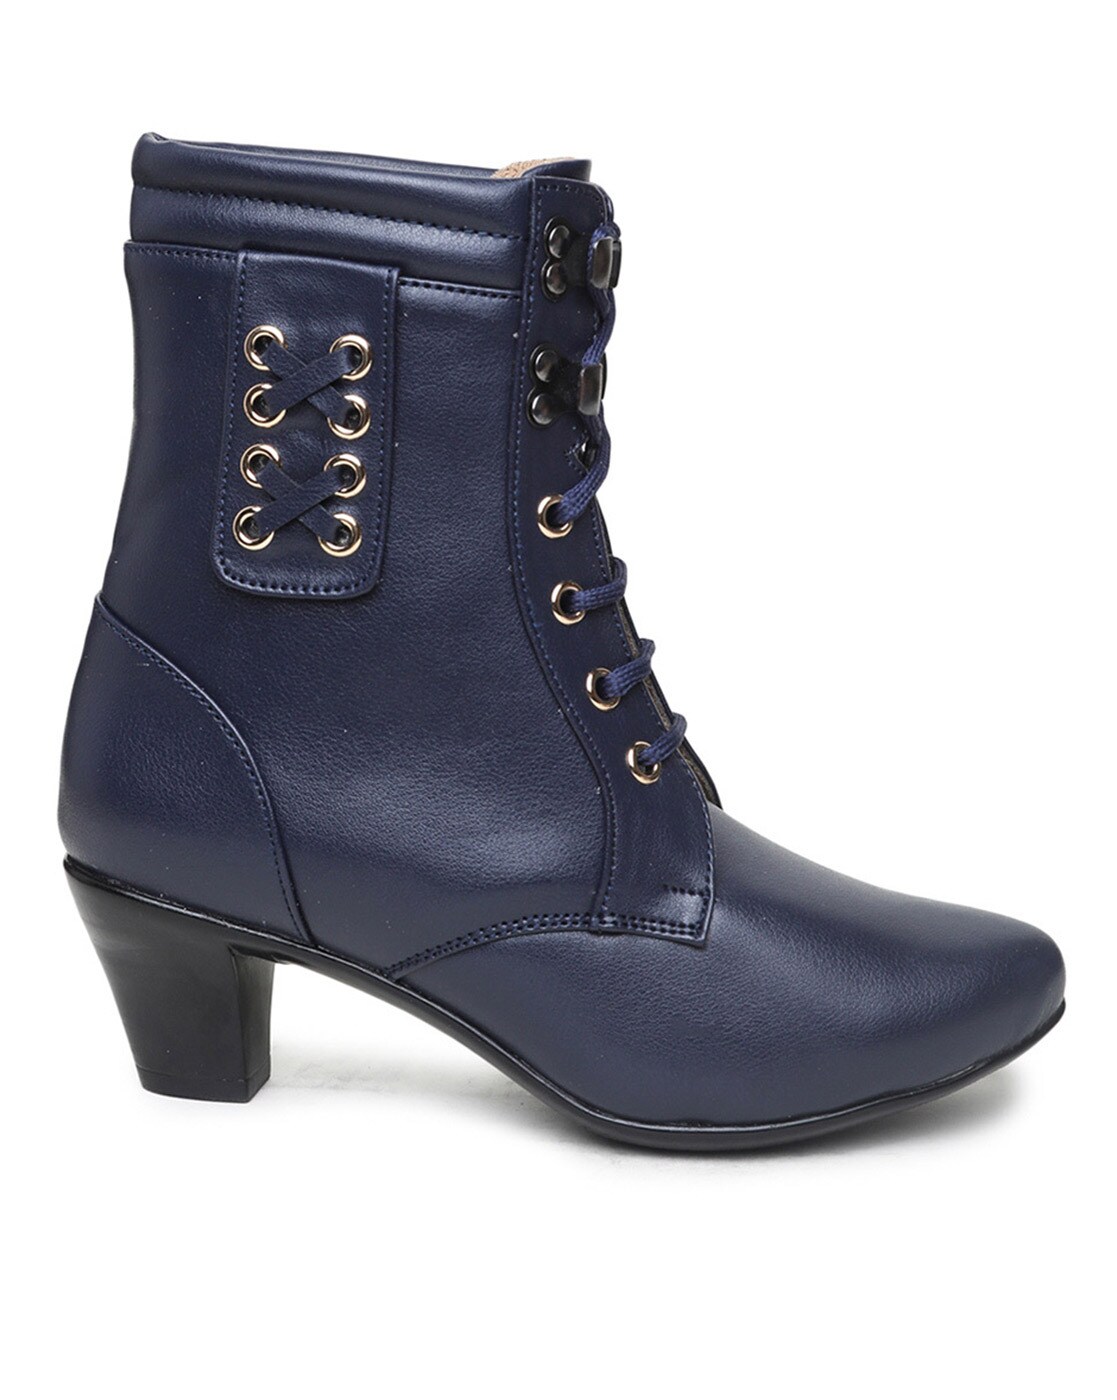 Buy Louis Vuitton Louis vuitton Star Trail Ankle Boot at Redfynd